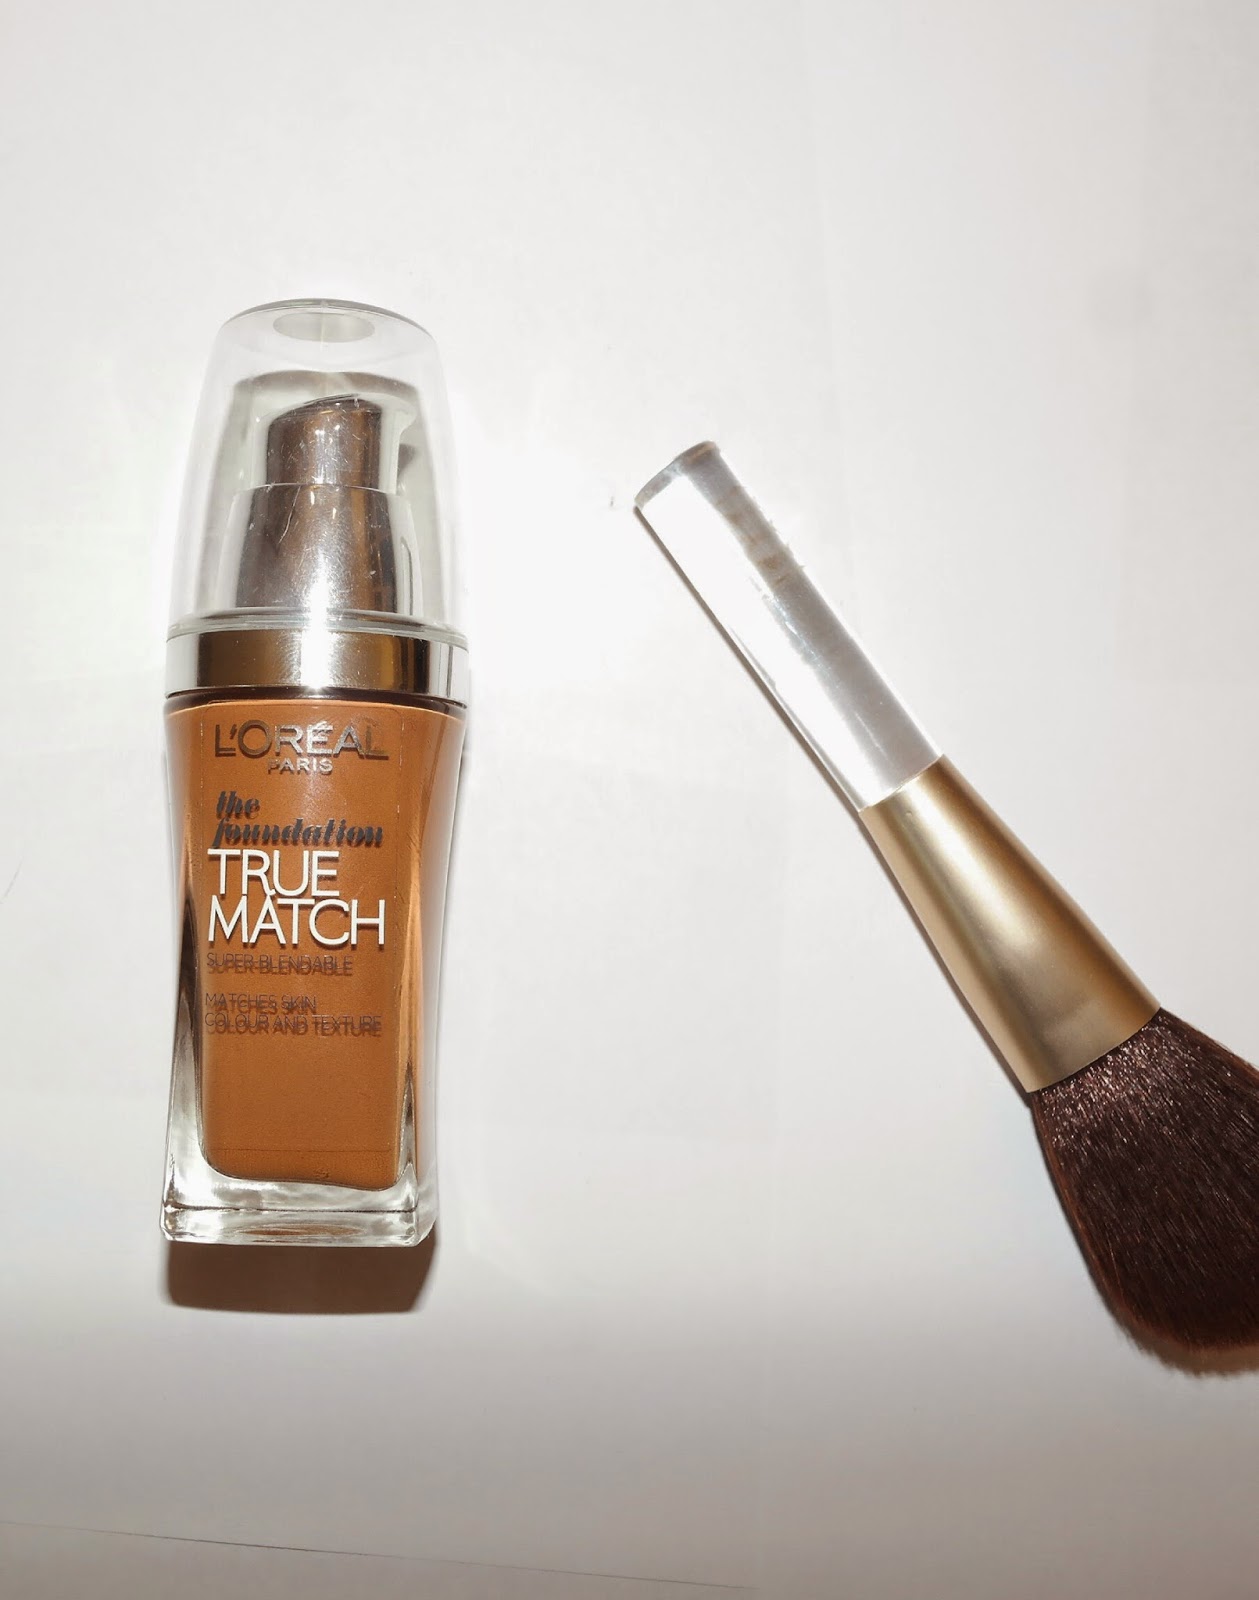 TheFoundationDirectory: Aallexxy's Foundation Files; L'oreal True Match